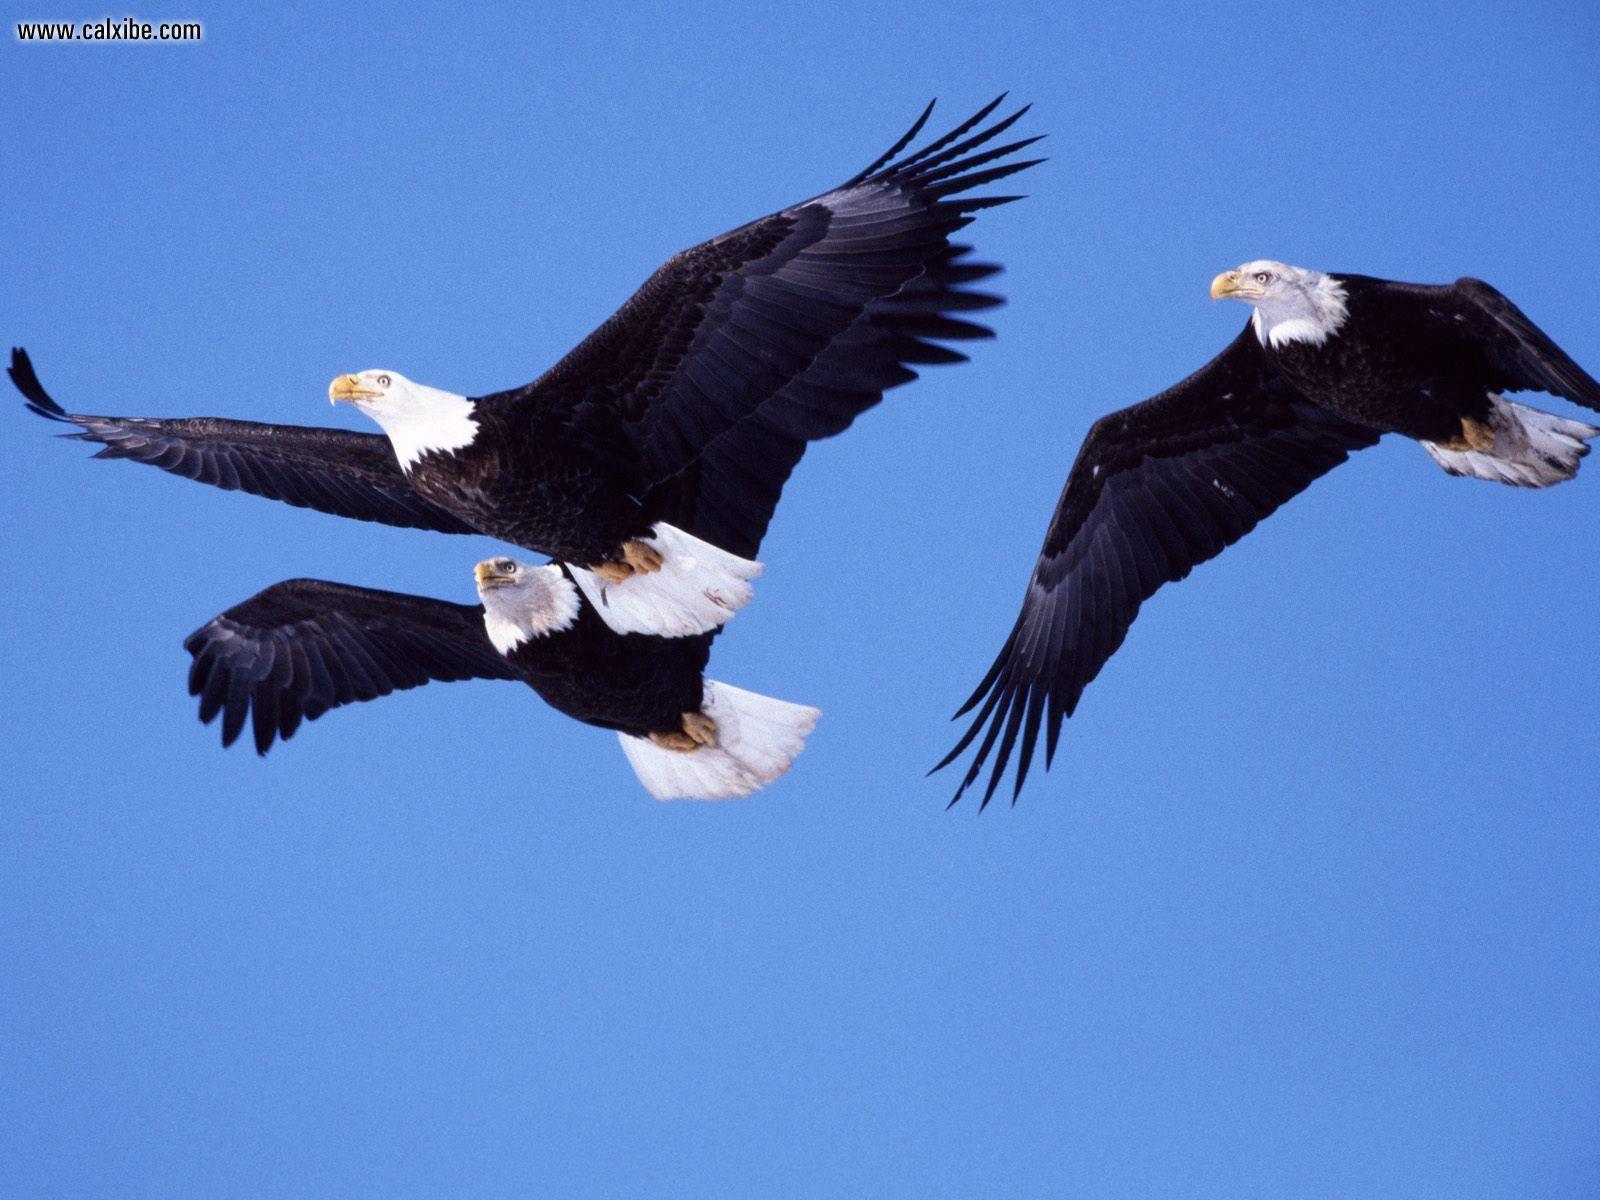 Bald Eagle Free Wallpaper For Phones. Eagle, For, Phones, Free